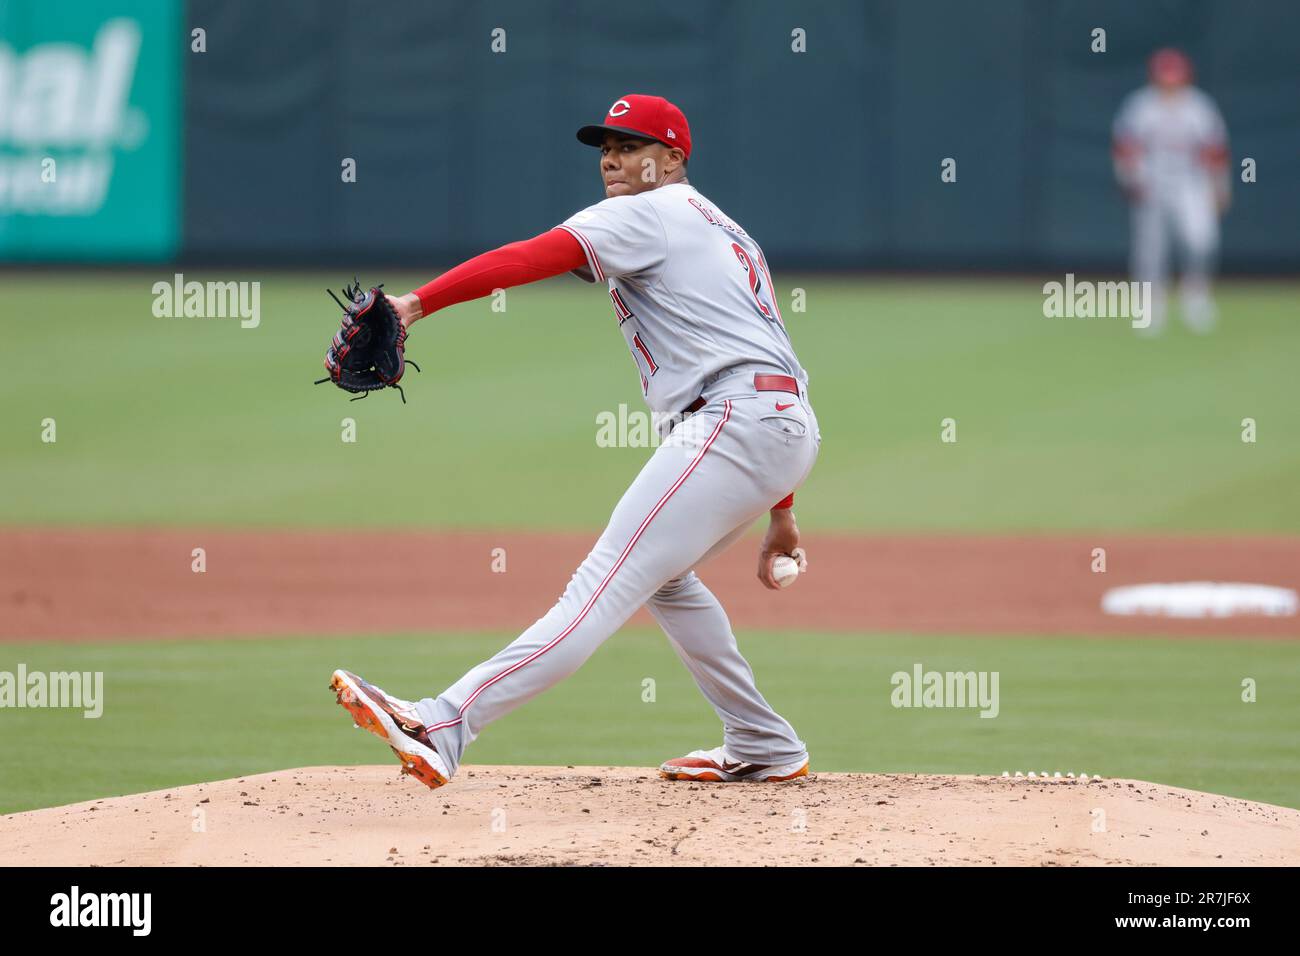 ST. LOUIS, MO - JUNE 11: Cincinnati Reds starting pitcher Hunter Greene  (21) delivers a pitch during an MLB game against the St. Louis Cardinals on  June 11, 2023 at Busch Stadium